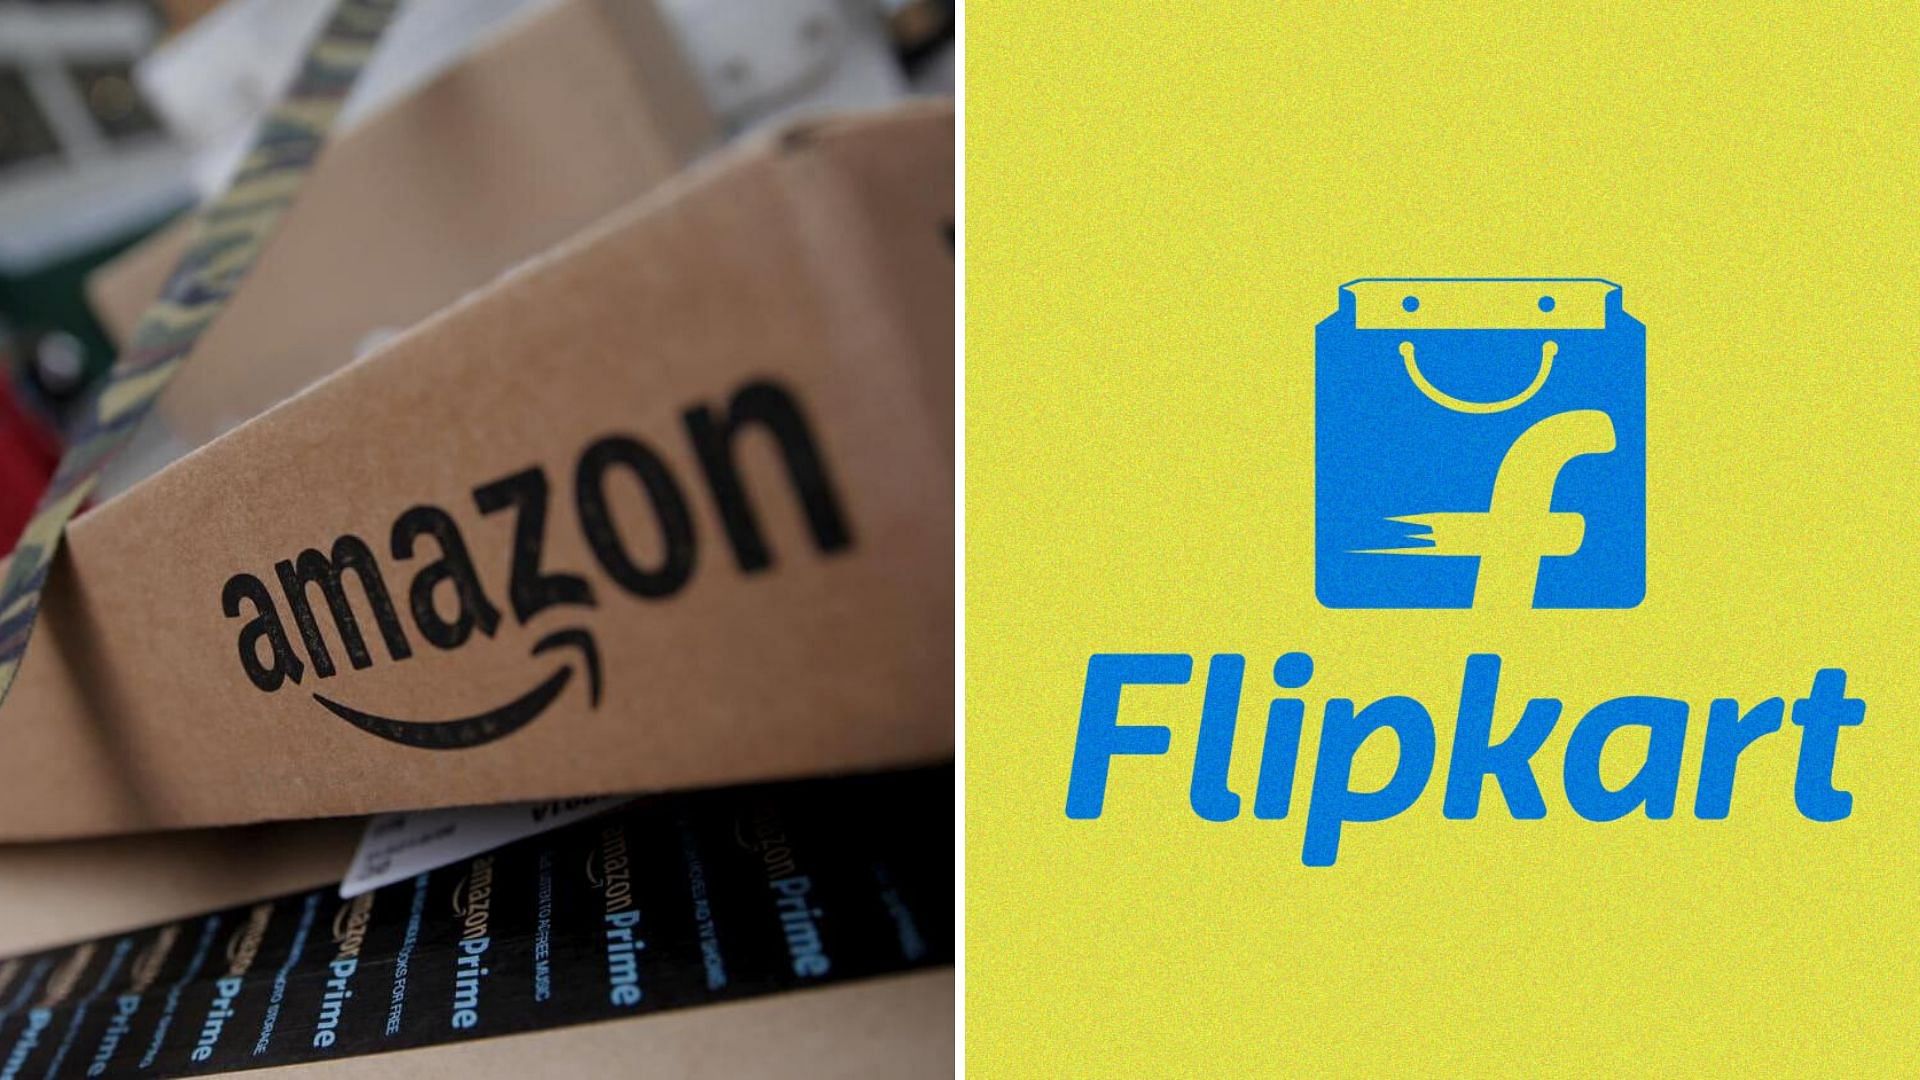 Amazon and Flipkart’s business practices under the scanner yet again.&nbsp;